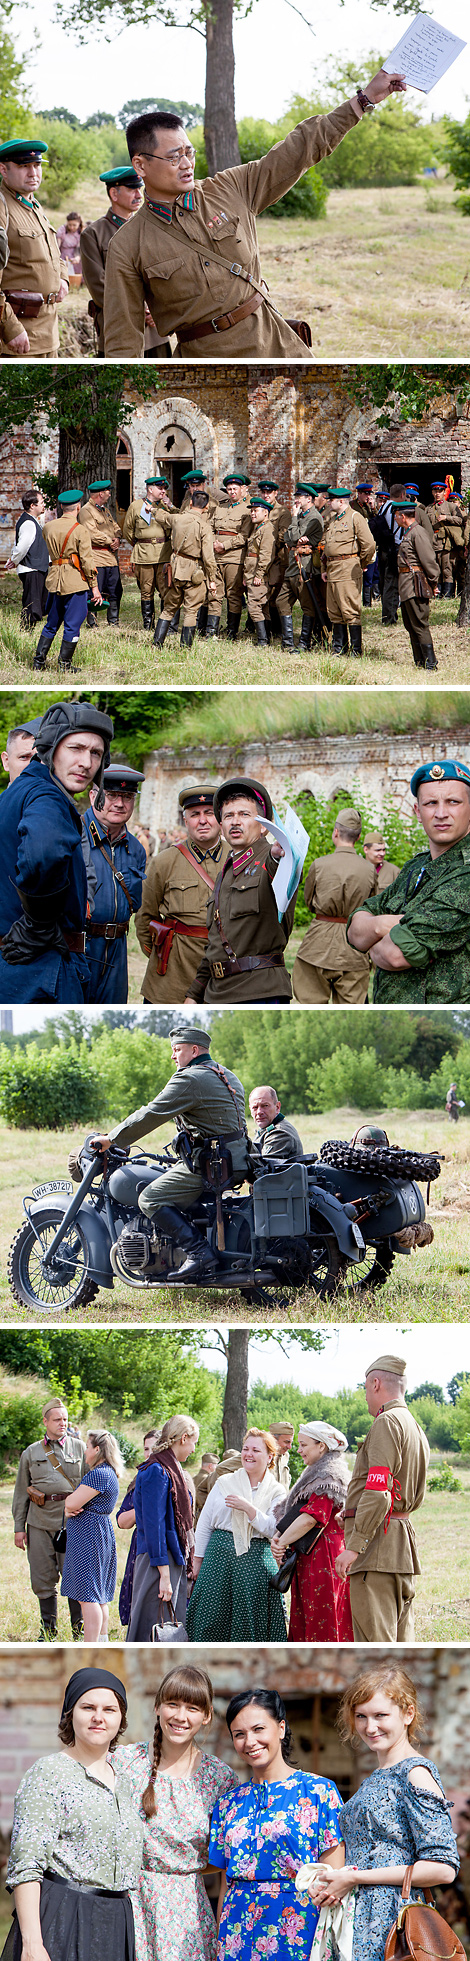 Over 500 reenactors from 13 countries take part in the war history festival in Brest